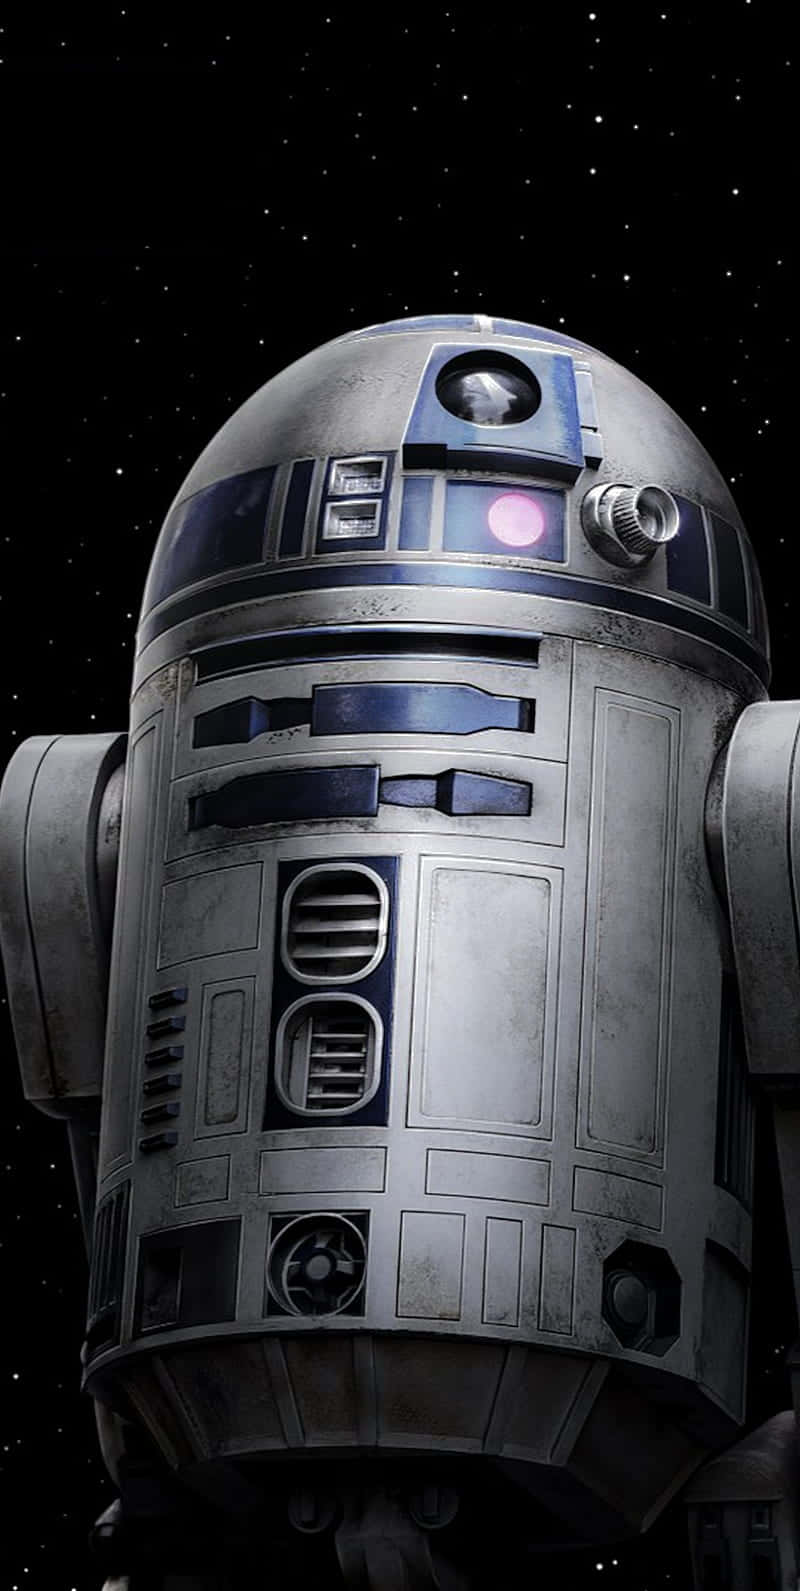 R2d2, The Iconic Droid From The Star Wars Universe